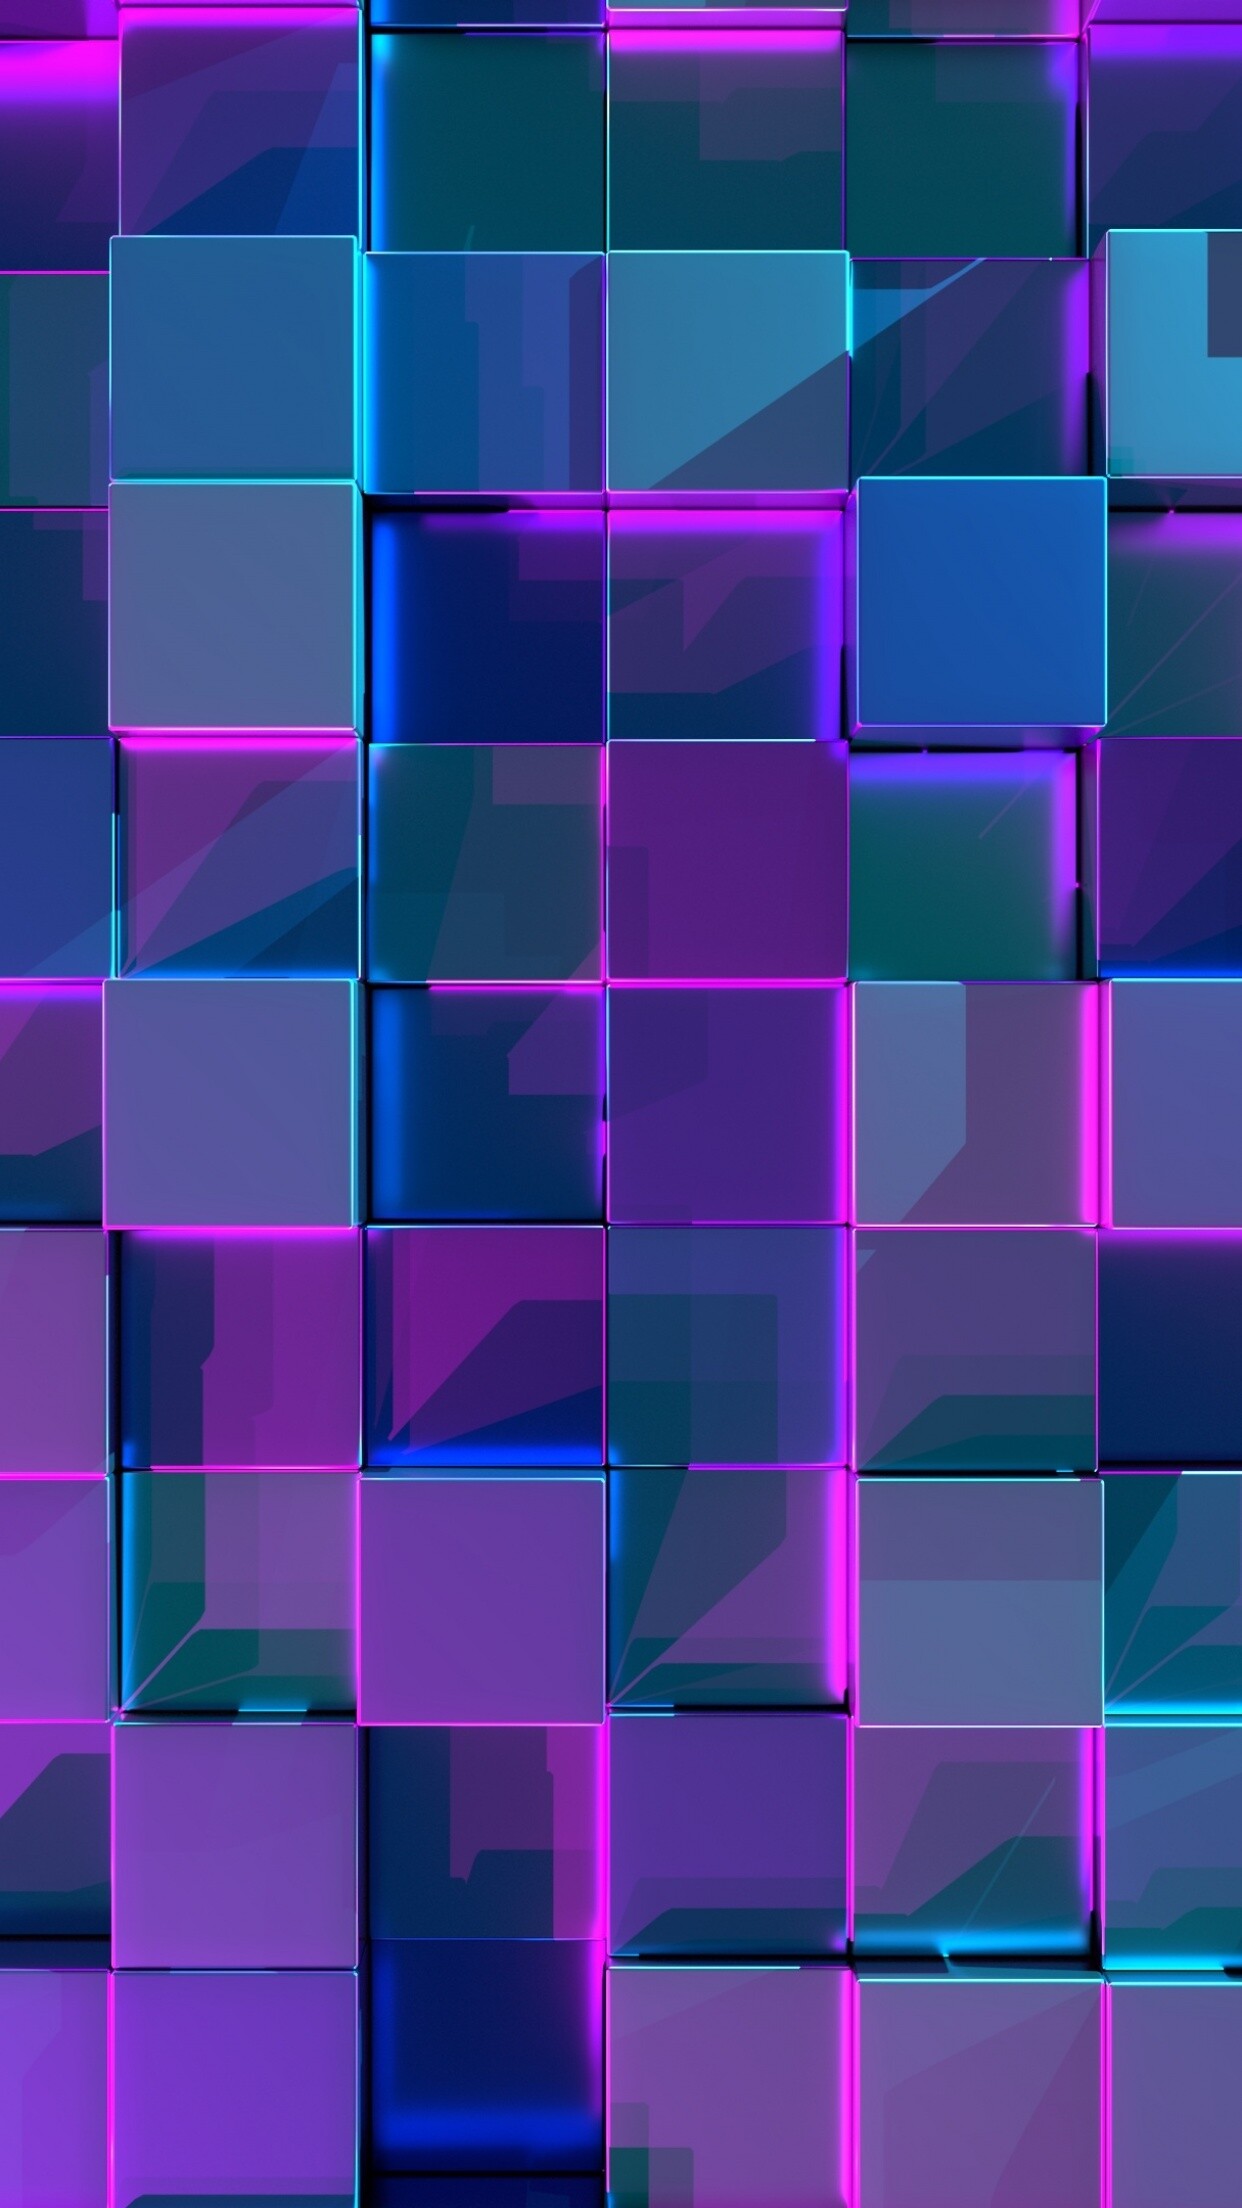 Geometric Abstract: Neon cubes, Parallel lines, Right angles, Squares. 1250x2210 HD Wallpaper.